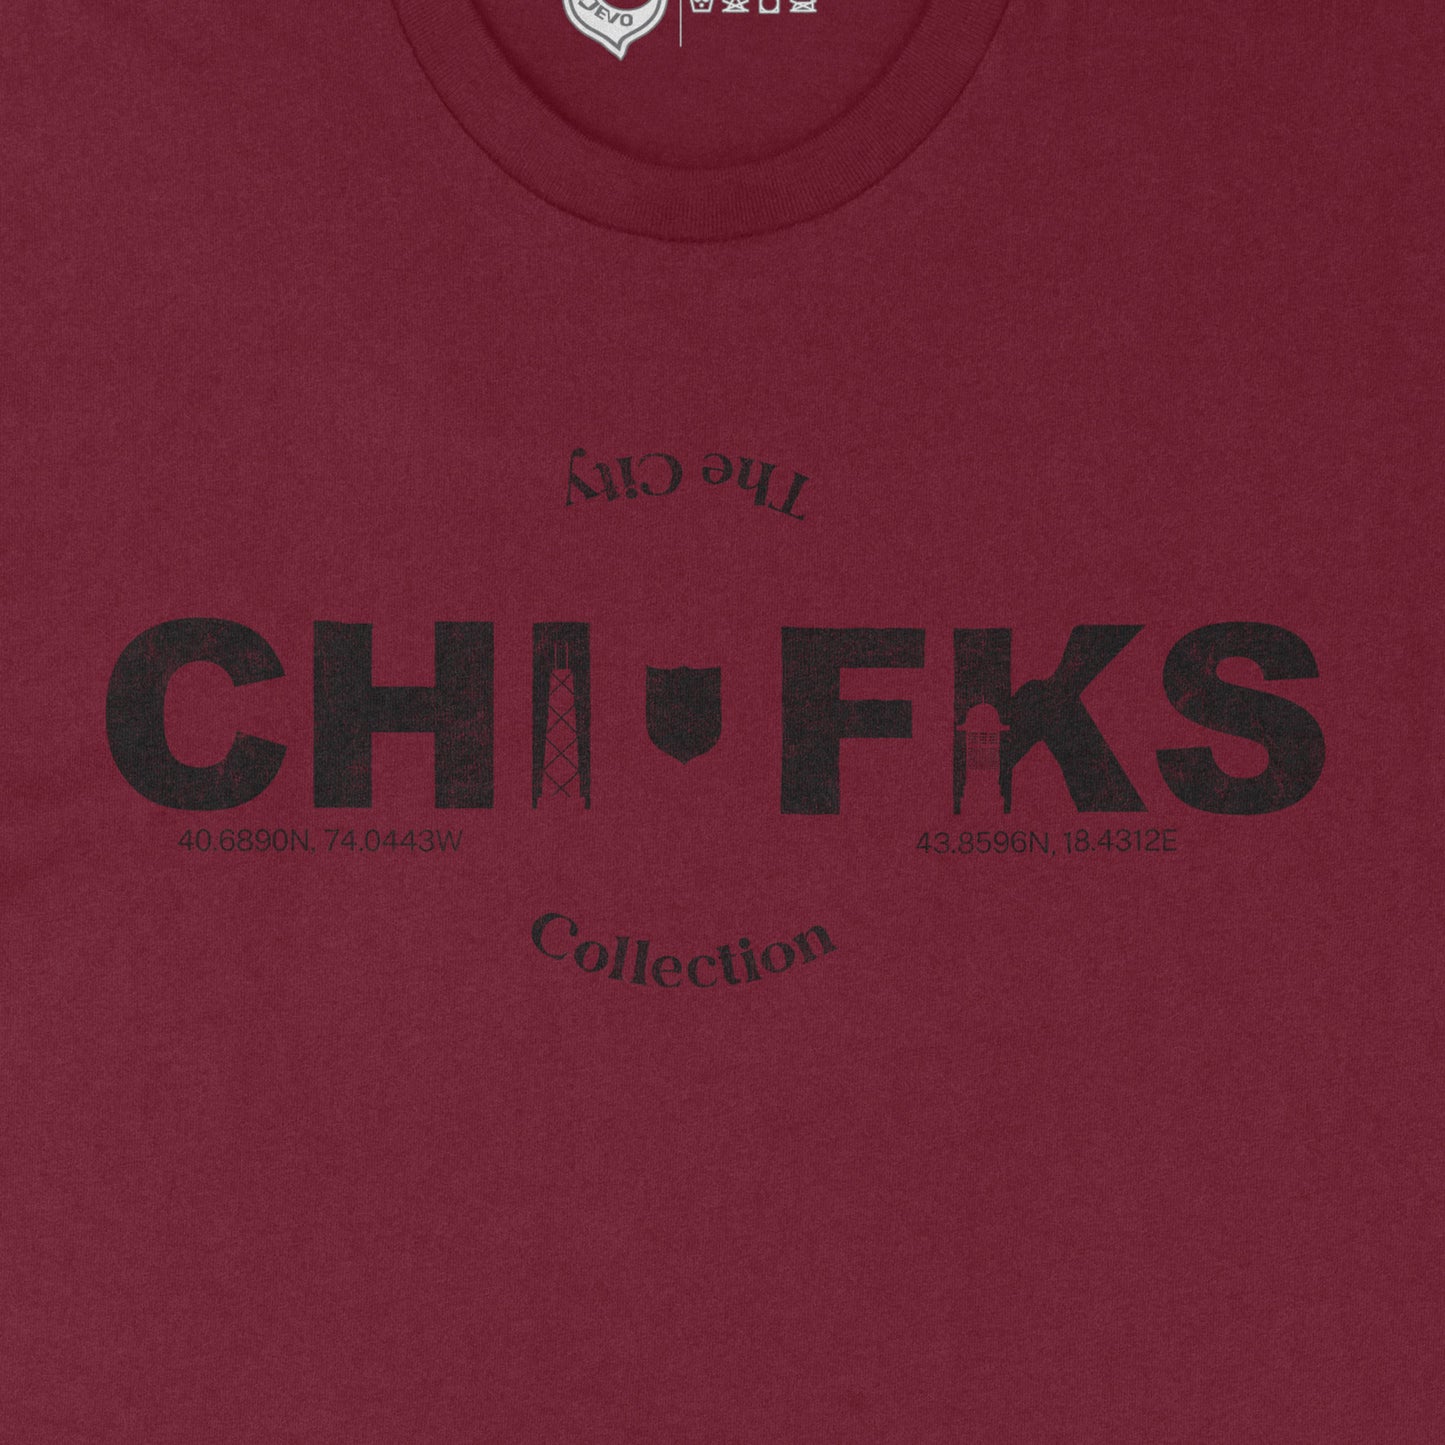 CHI x FKS City Collection Tee